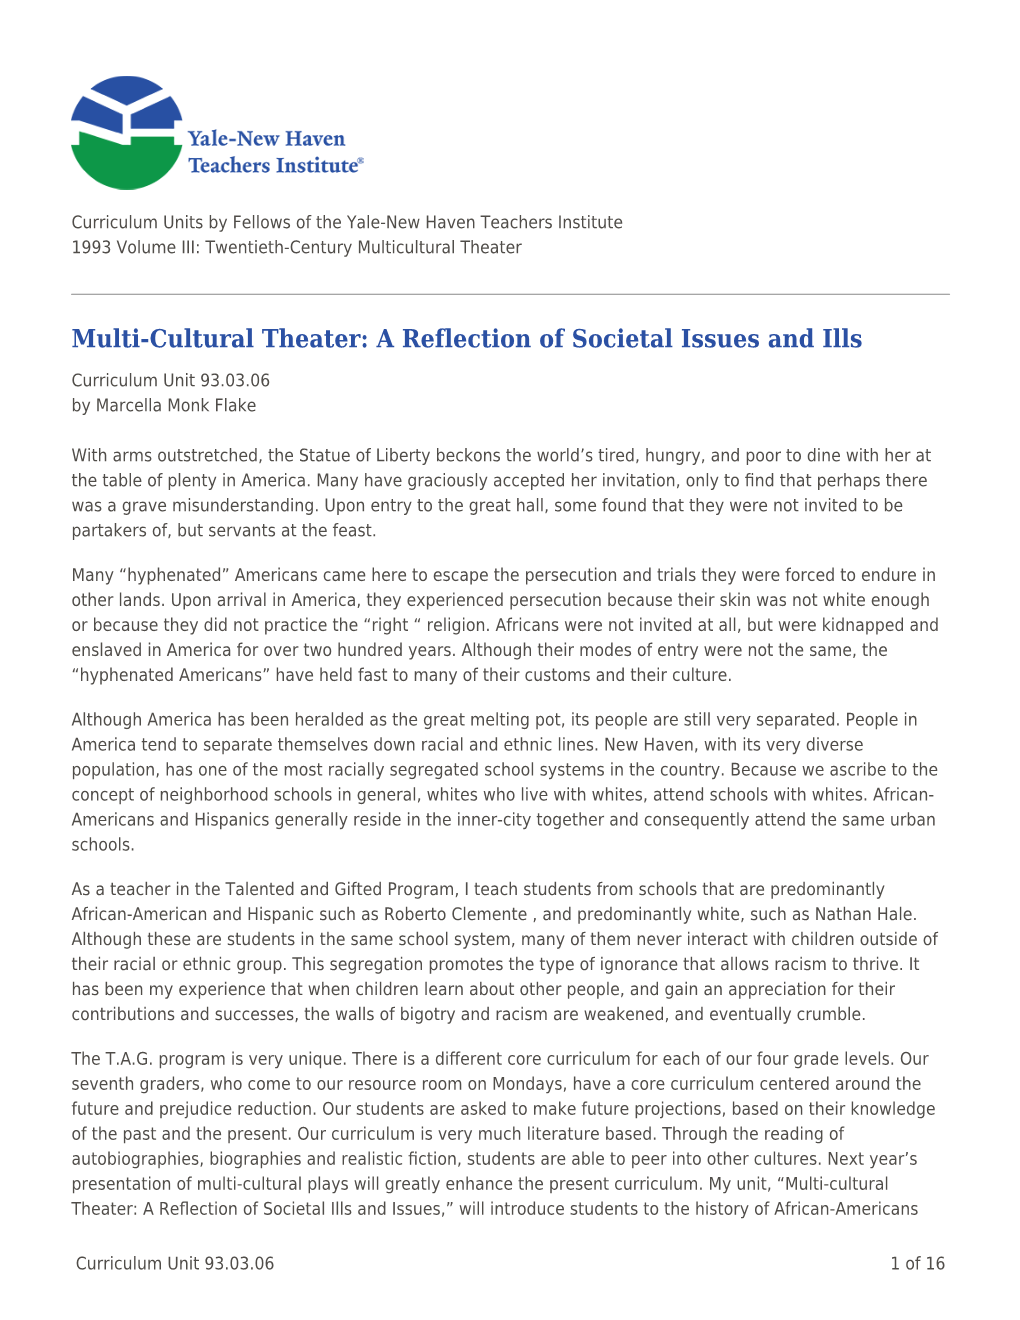 Multi-Cultural Theater: a Reflection of Societal Issues and Ills